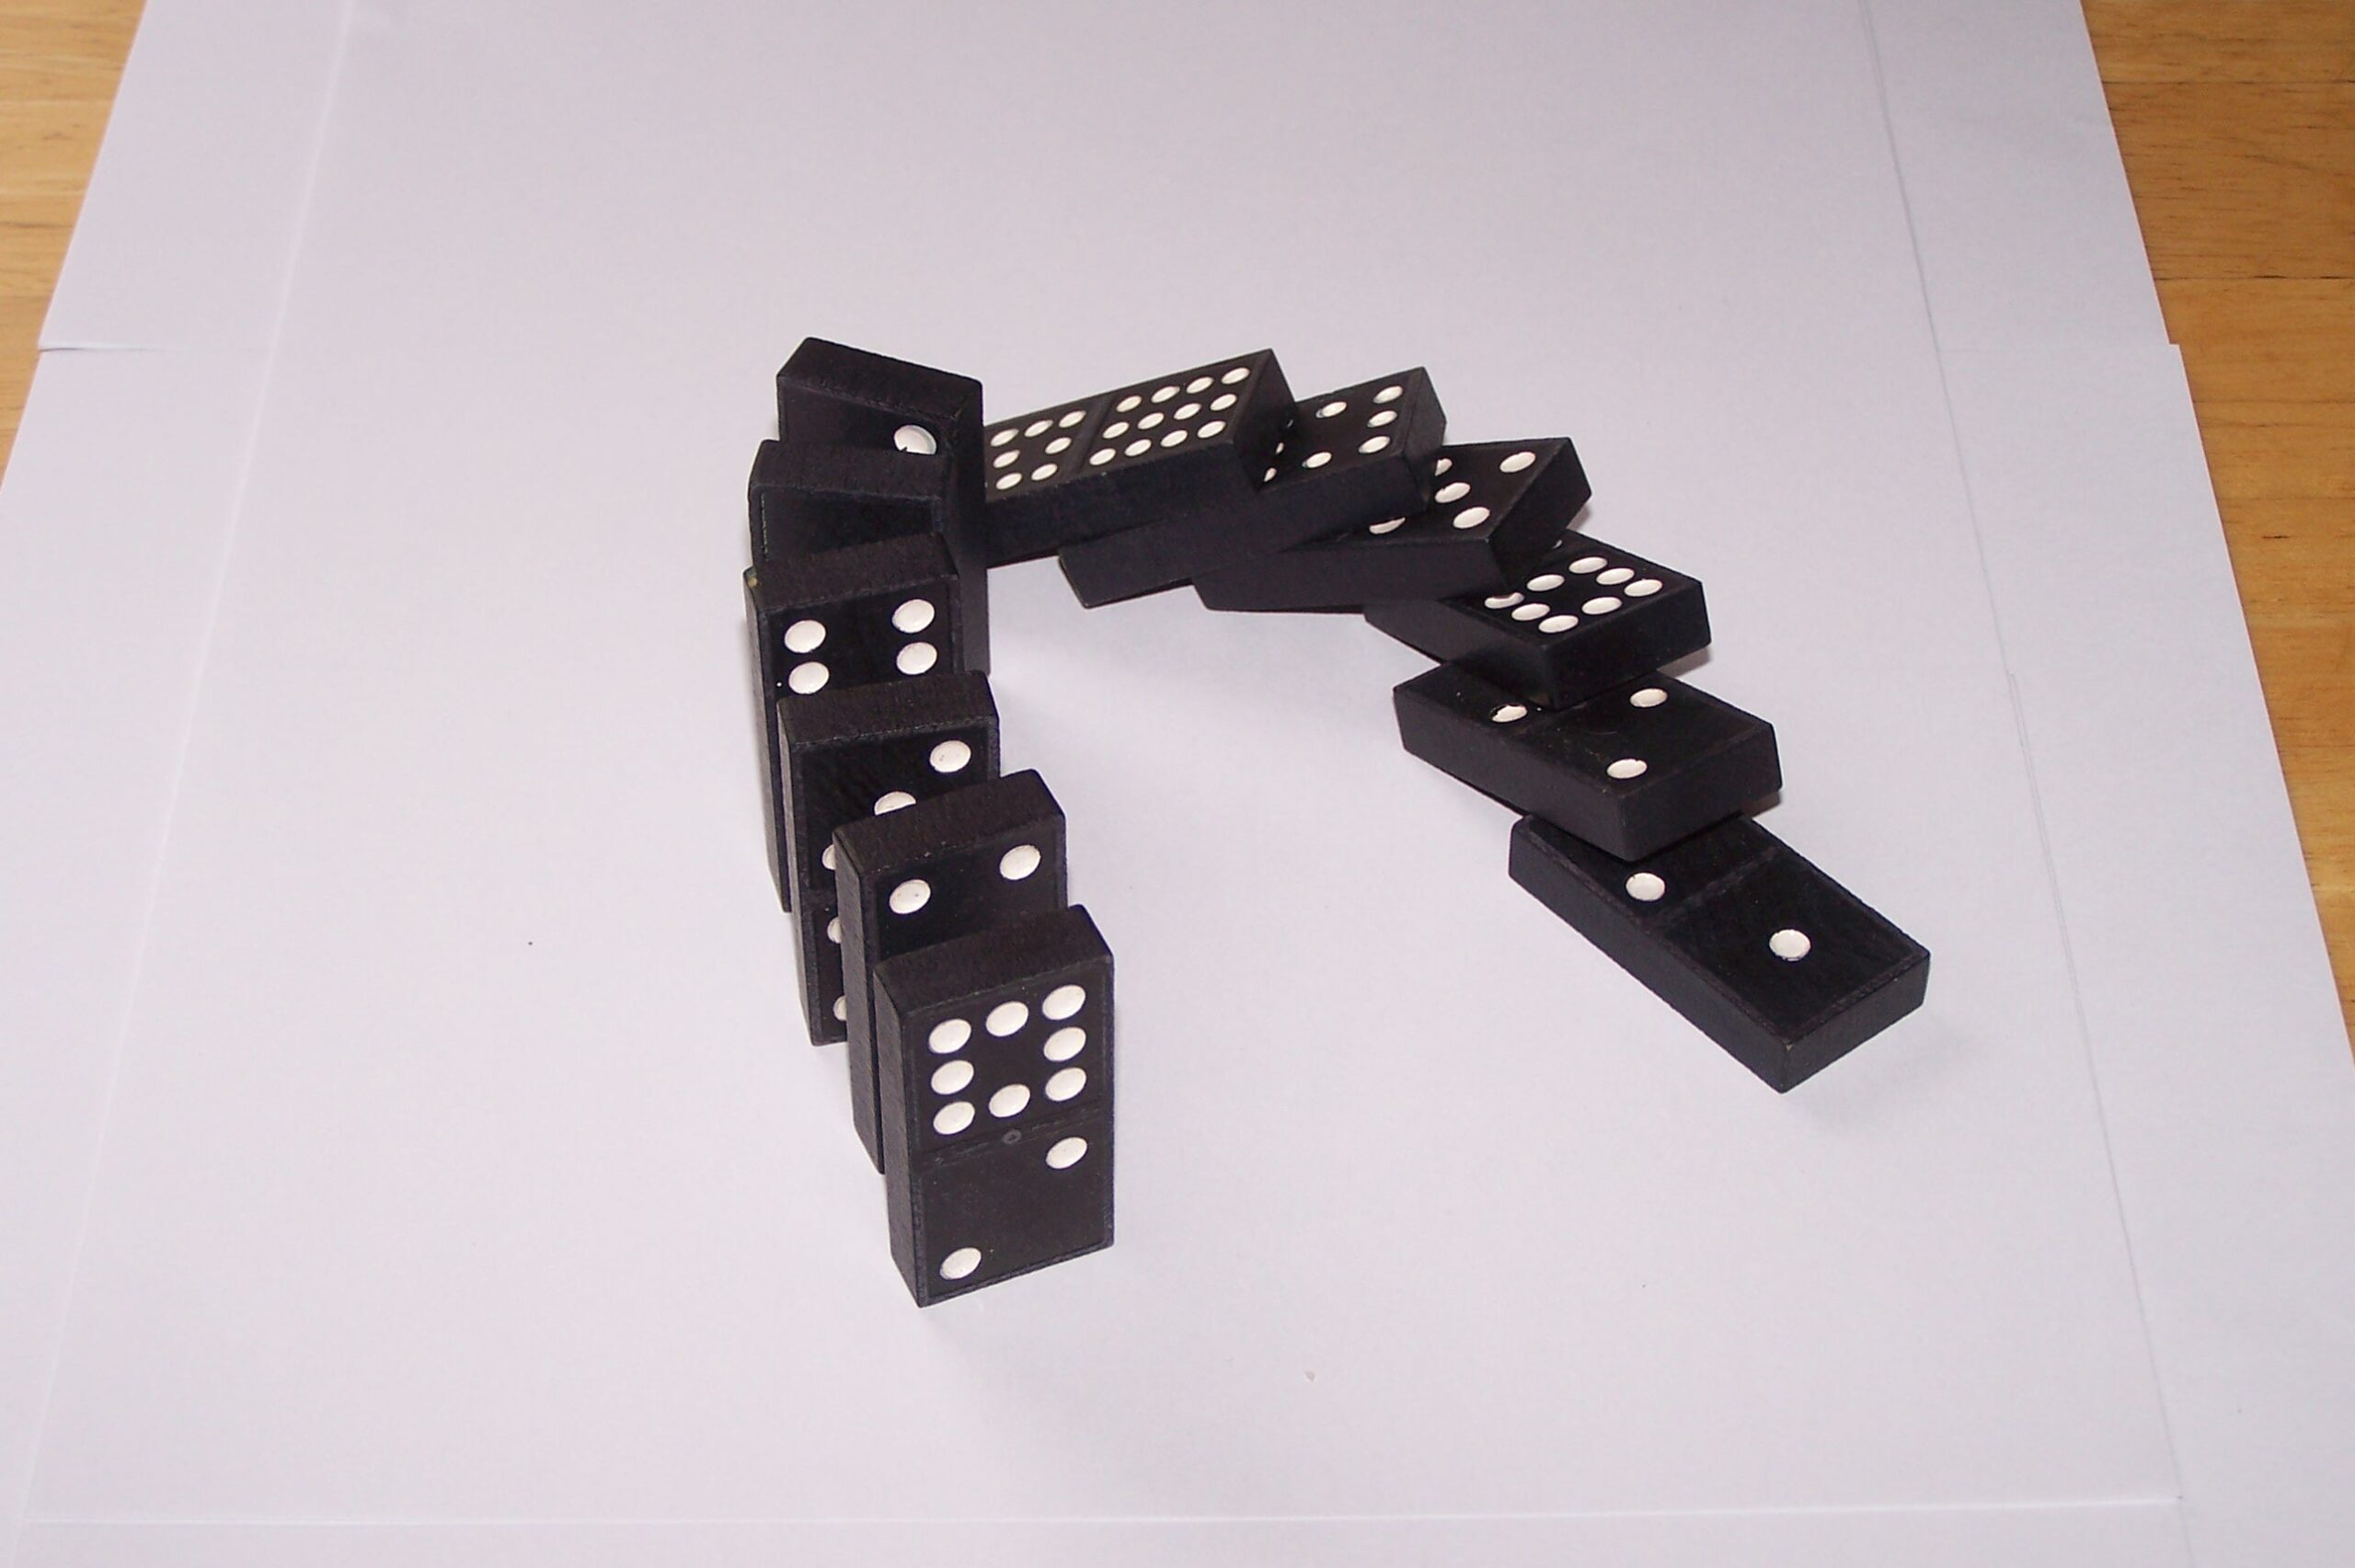 12 dominoes falling over in a curve.